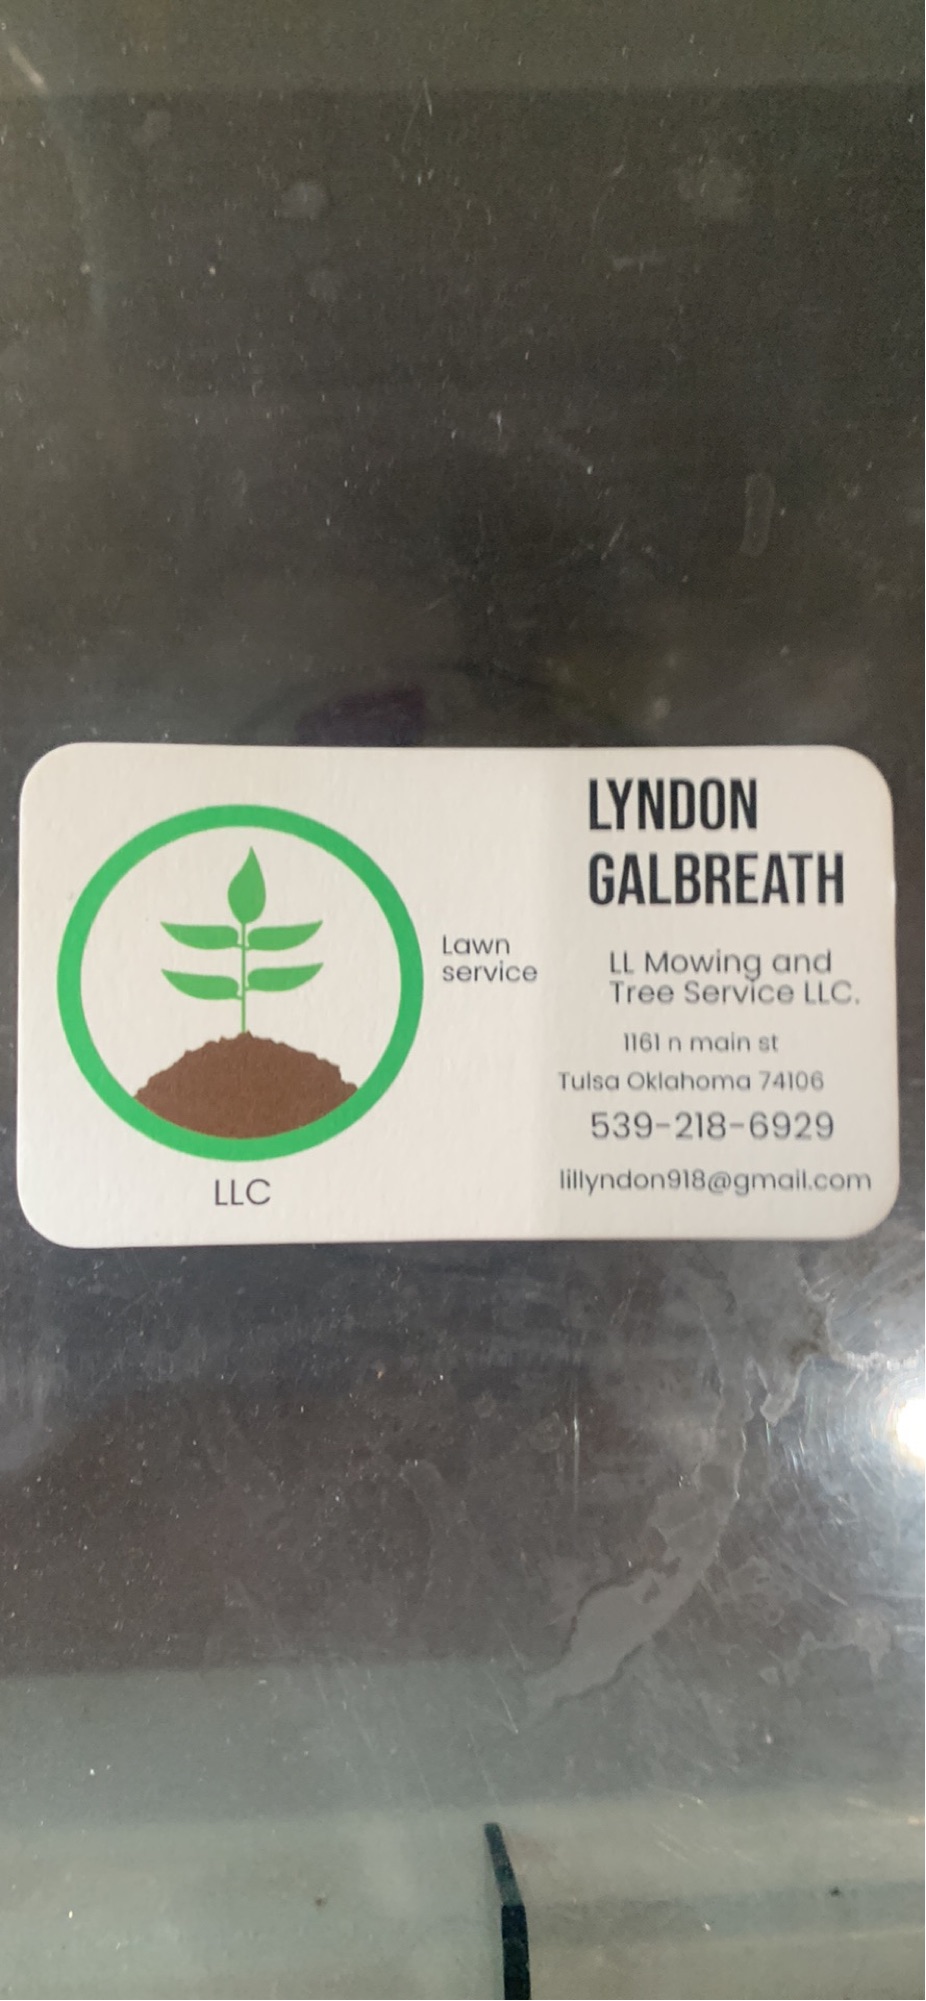 LL Mowing and Tree Service Logo